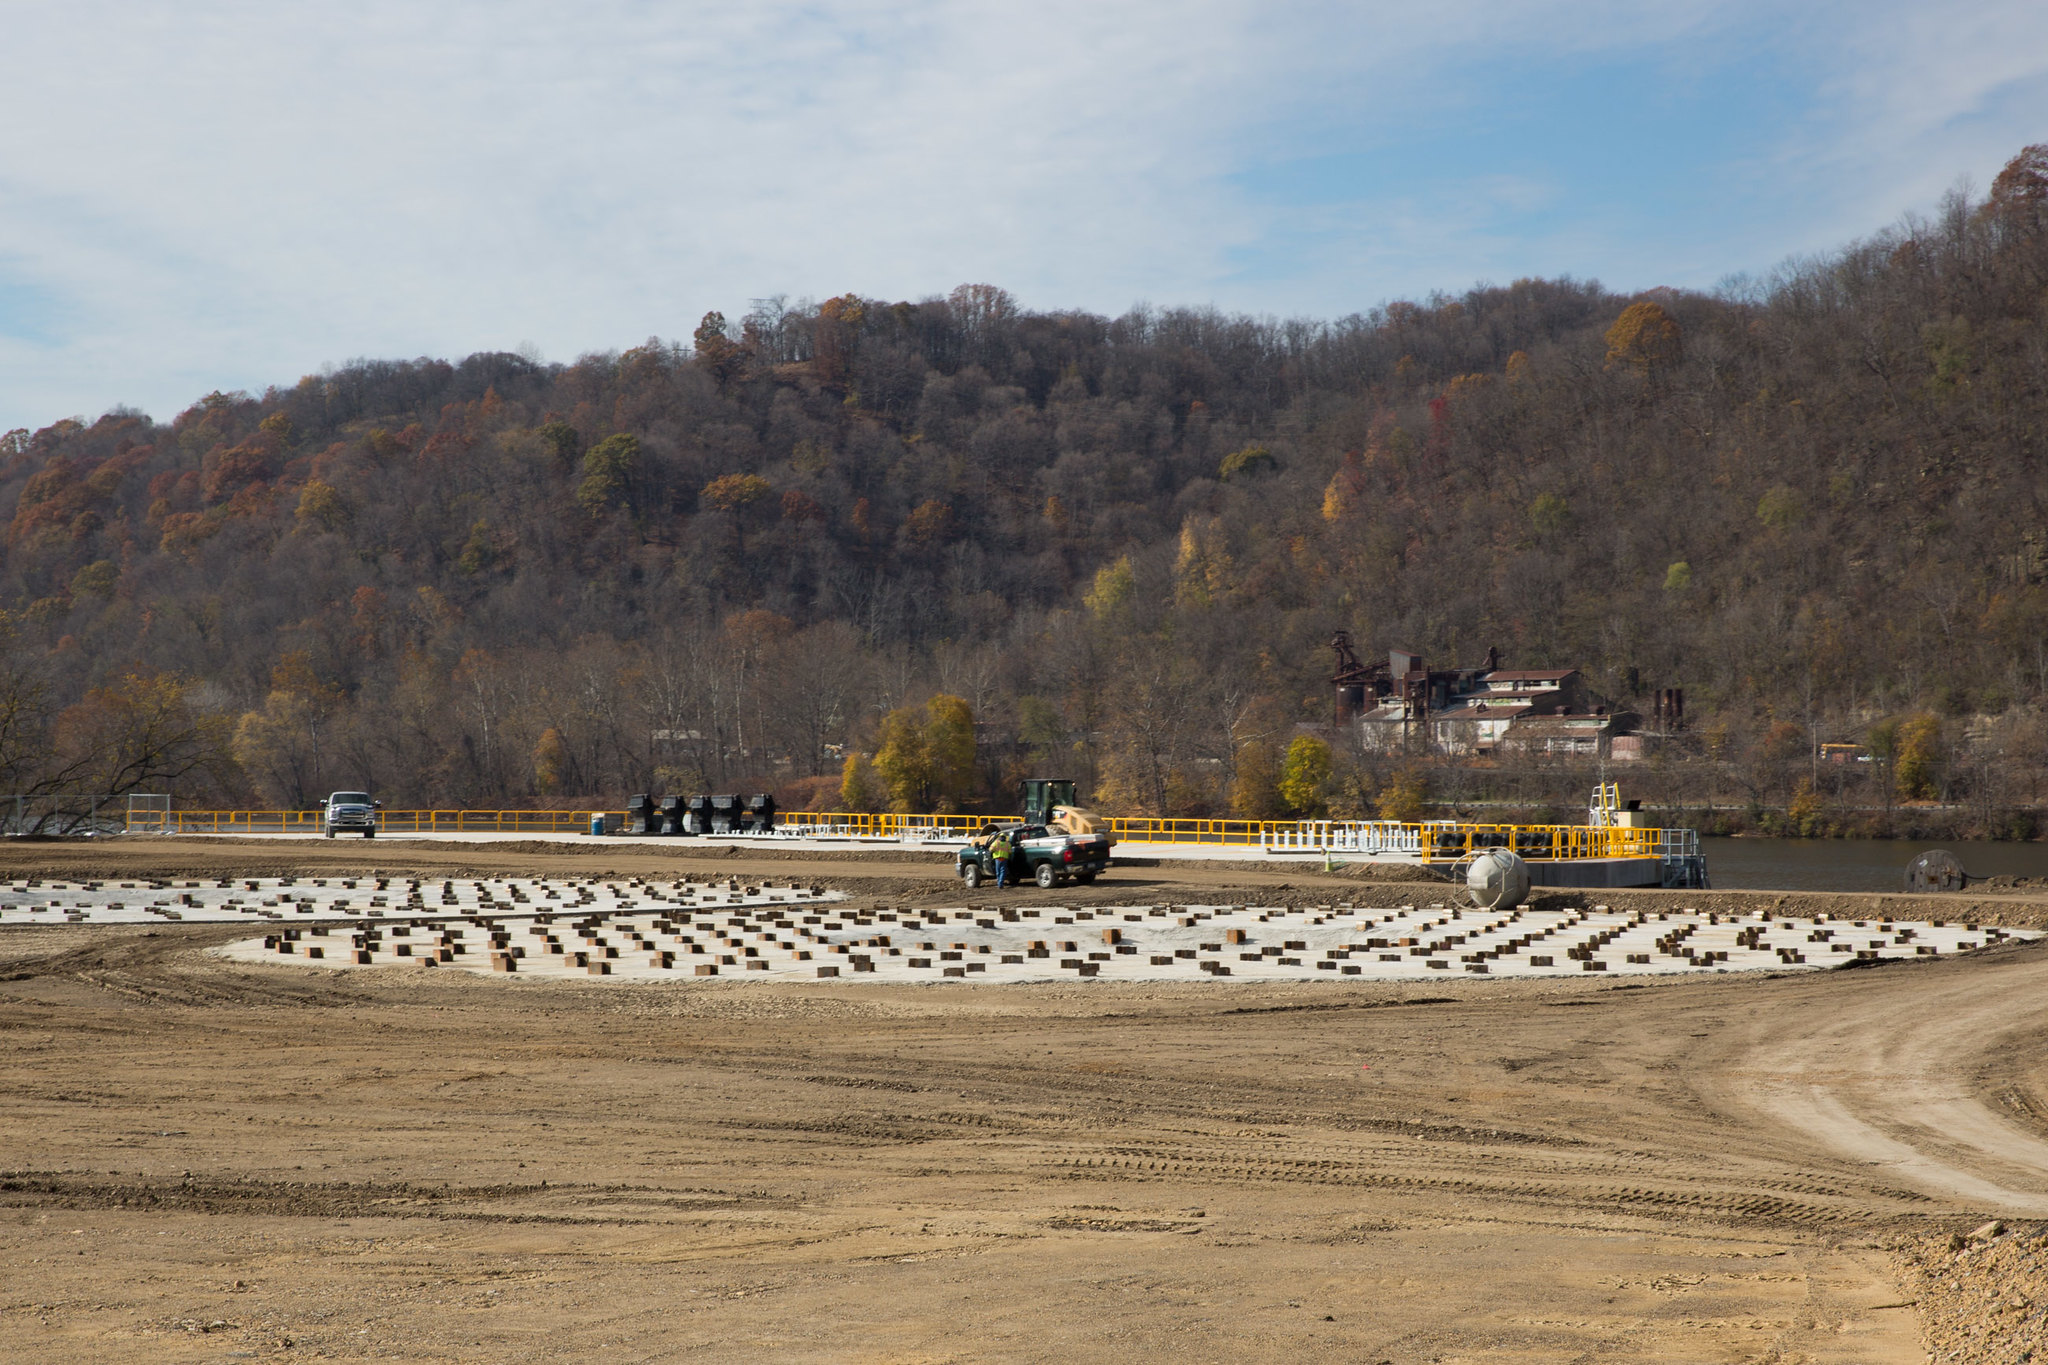 Shell plastics plant construction site in hills of Pennsylvania in 2016.